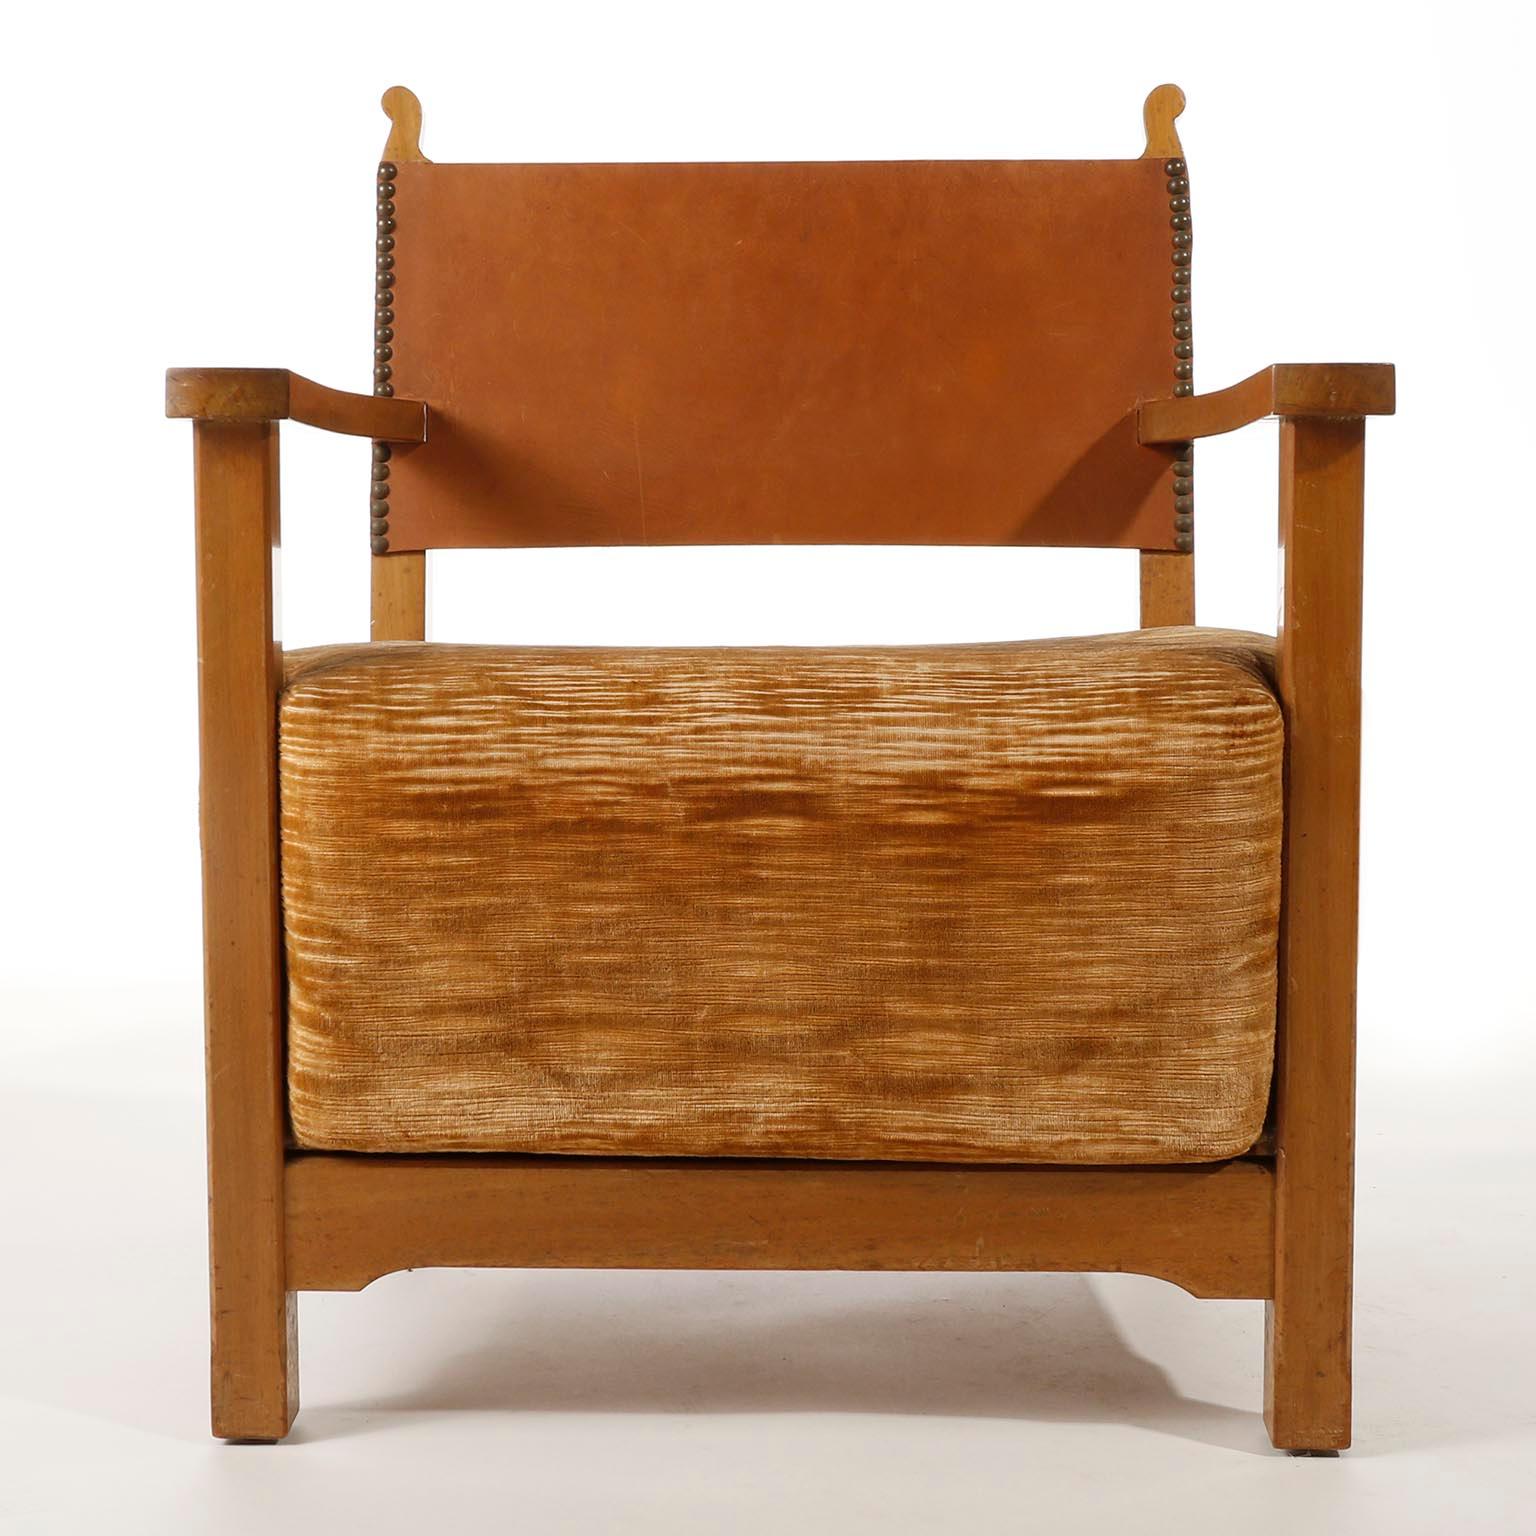 A gorgeous and extremely rare Adolf Loos armchair manufactured by Friedrich Otto Schmidt, Vienna, circa 1930.
It is made of a solid walnut wood frame with a loose seat chusion covered with brown velvet and a hide leather backrest fixed with patined